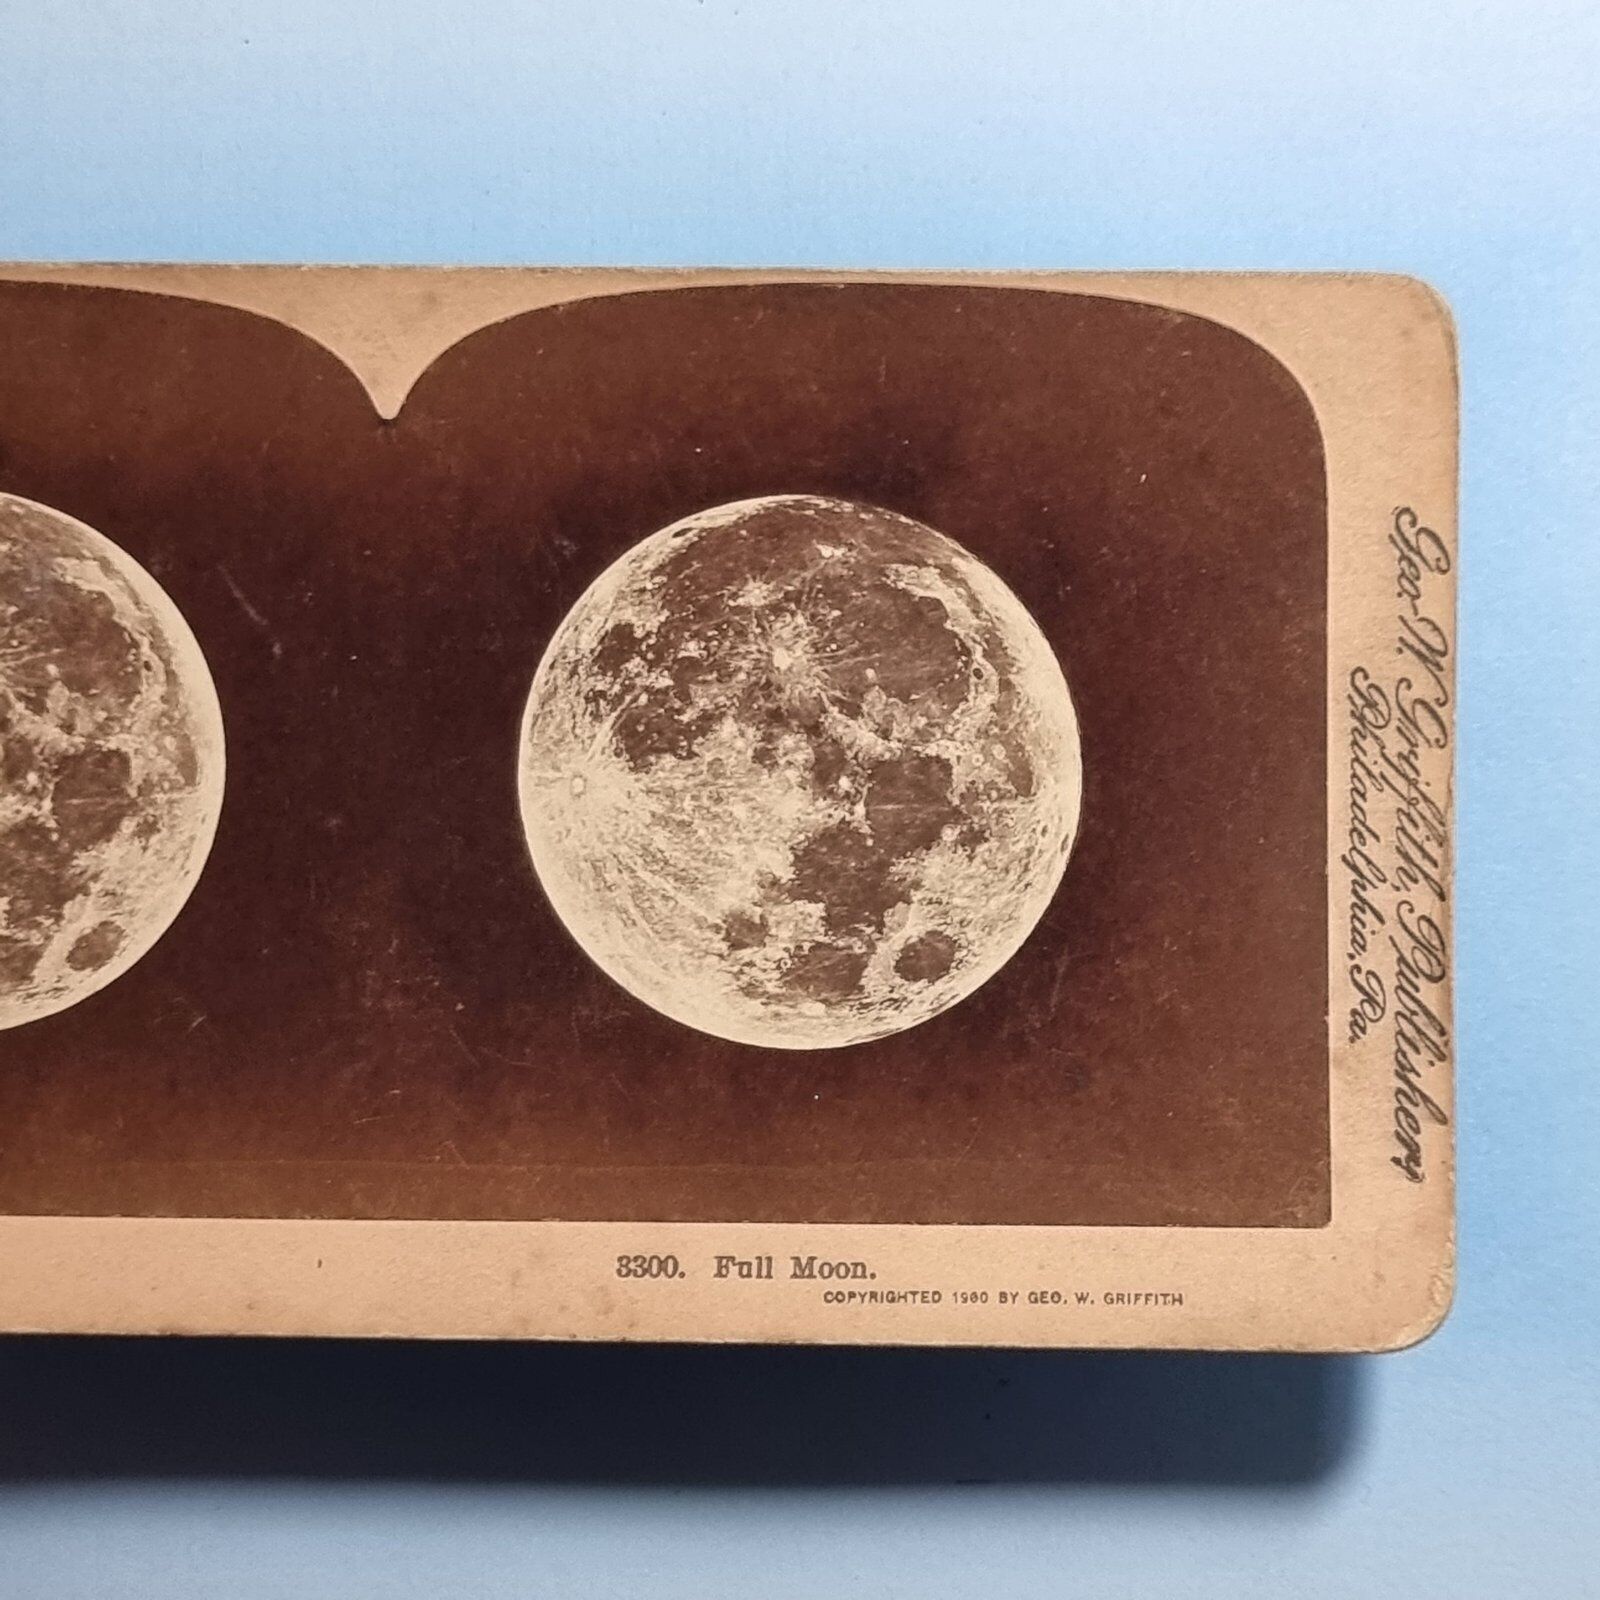 VIctorian Astronomy Stereoview 3D C1900 Real Photo Full Moon Lunar Study